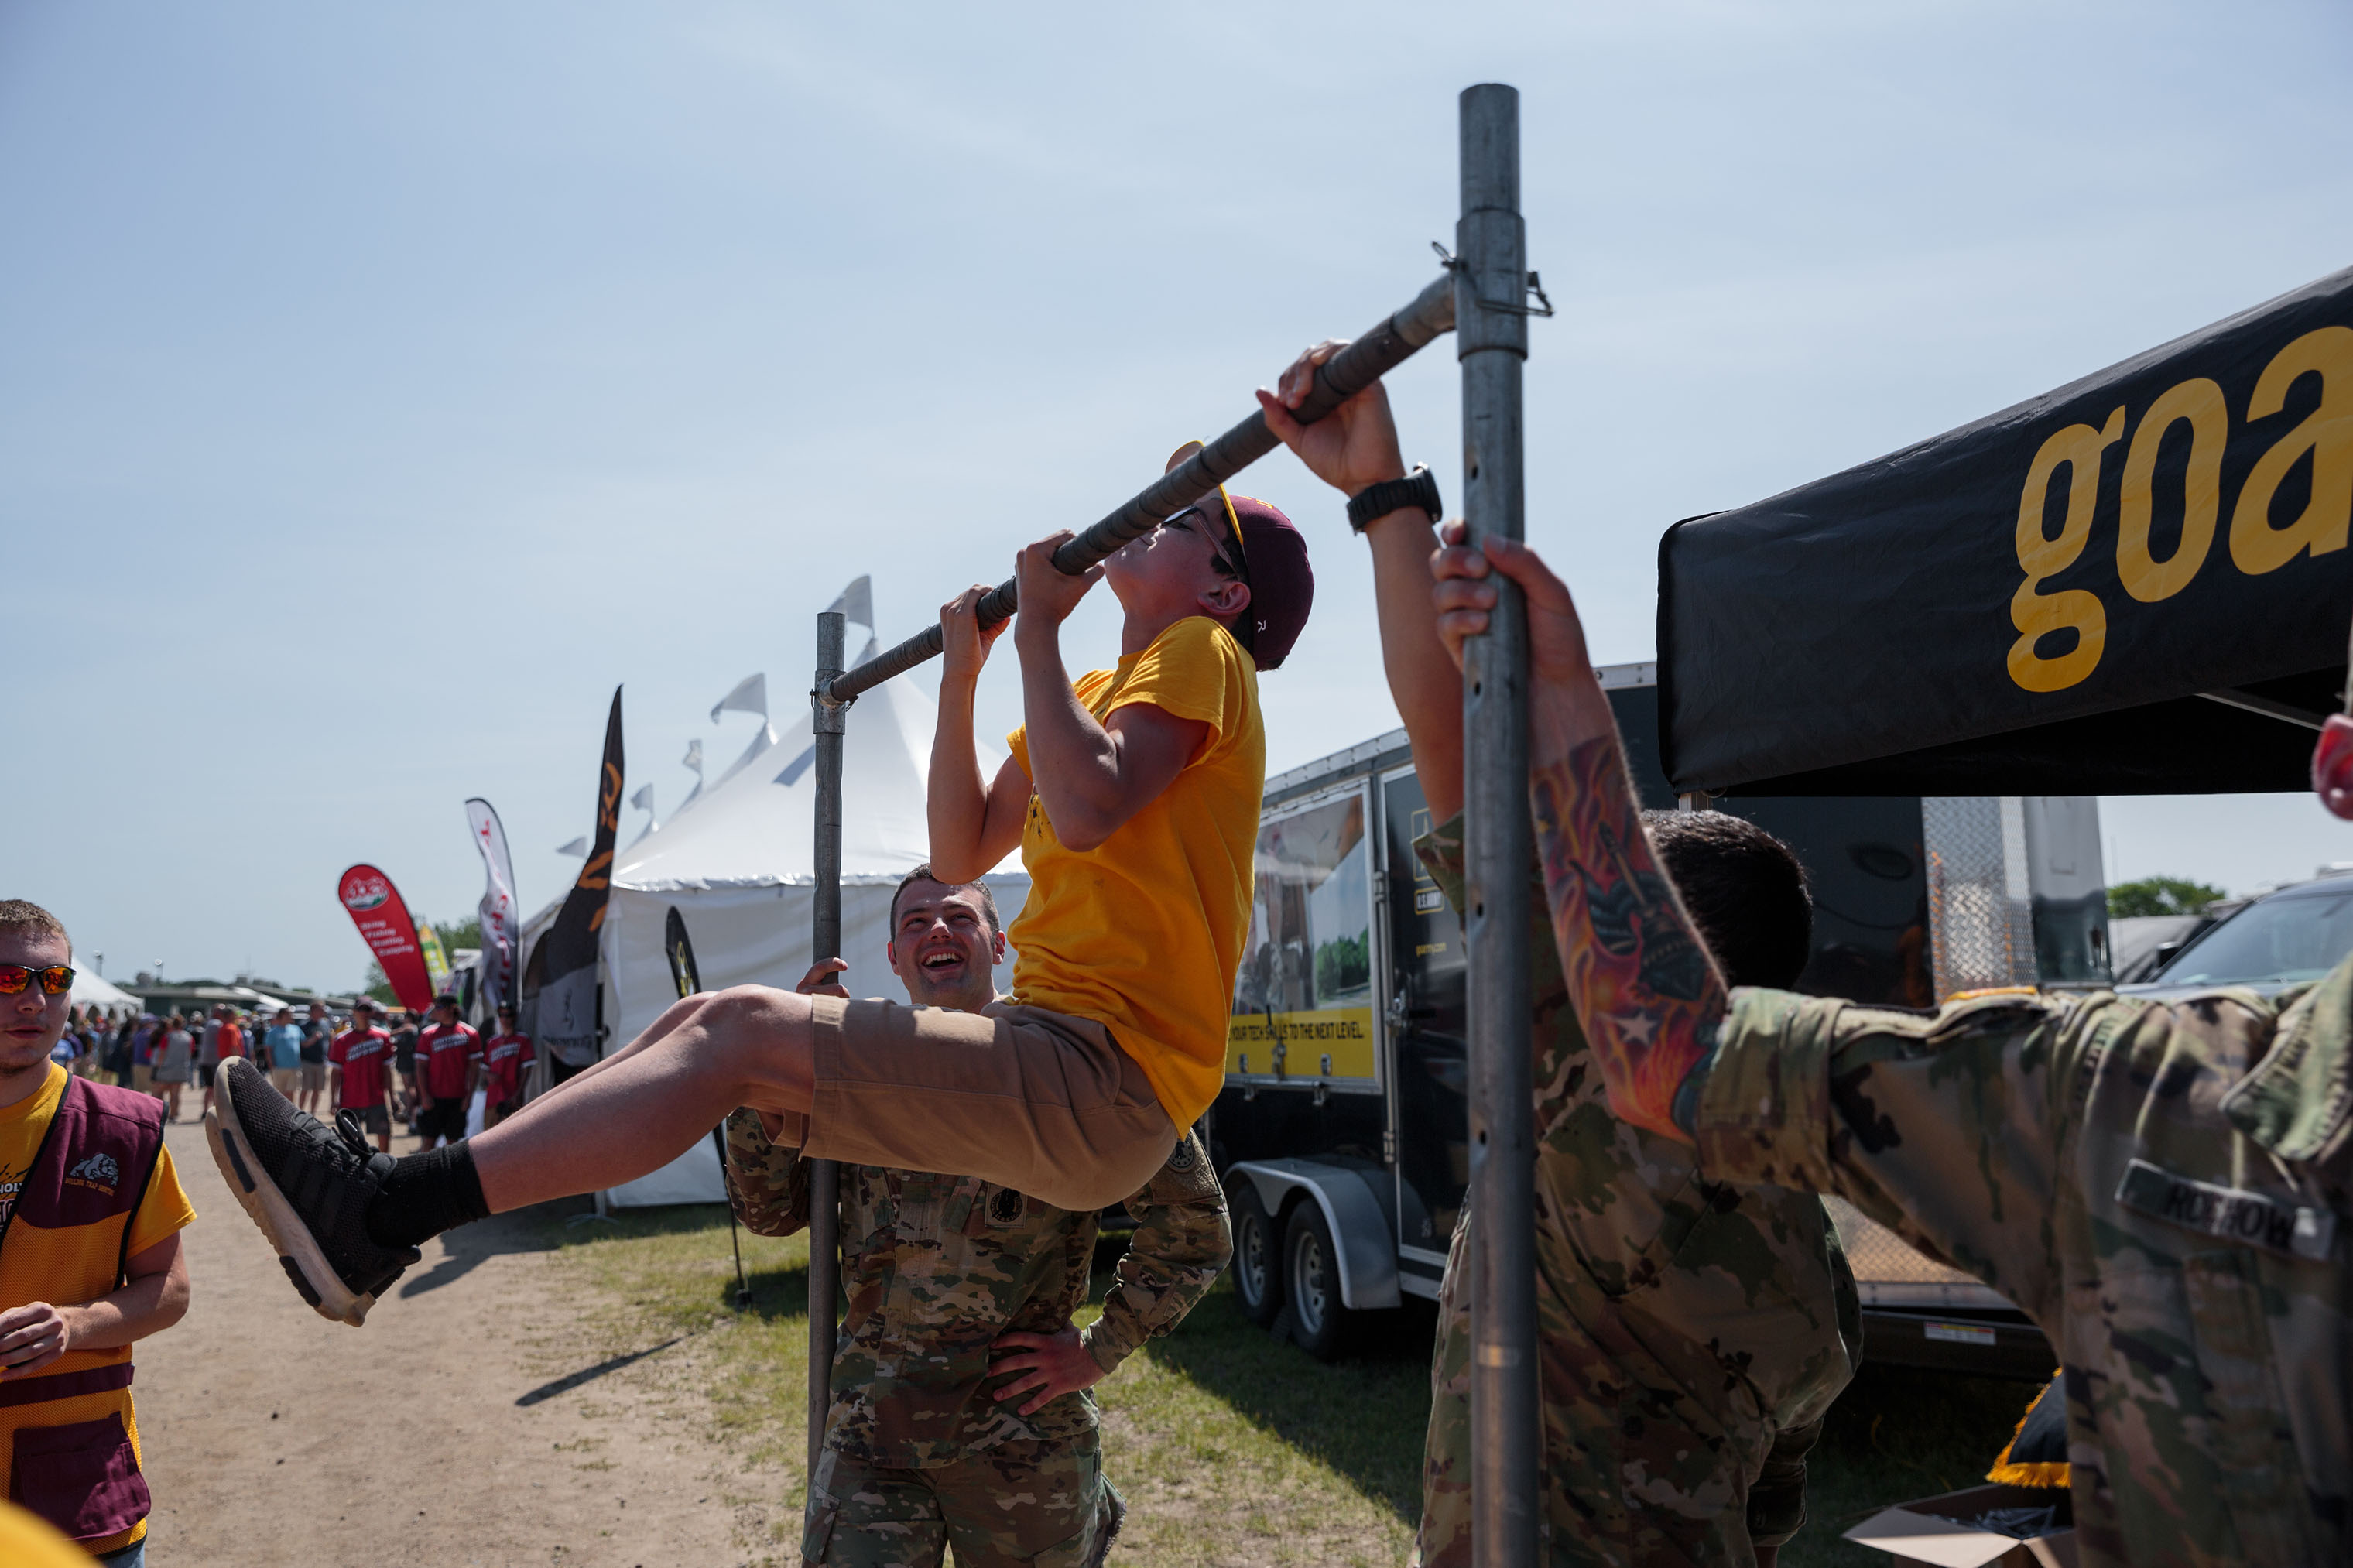 Students participate in a pull-up challenge offered by the "Go-Army" vendor tent at the annual trap shooting championship. (Sarah Blesener for TIME)